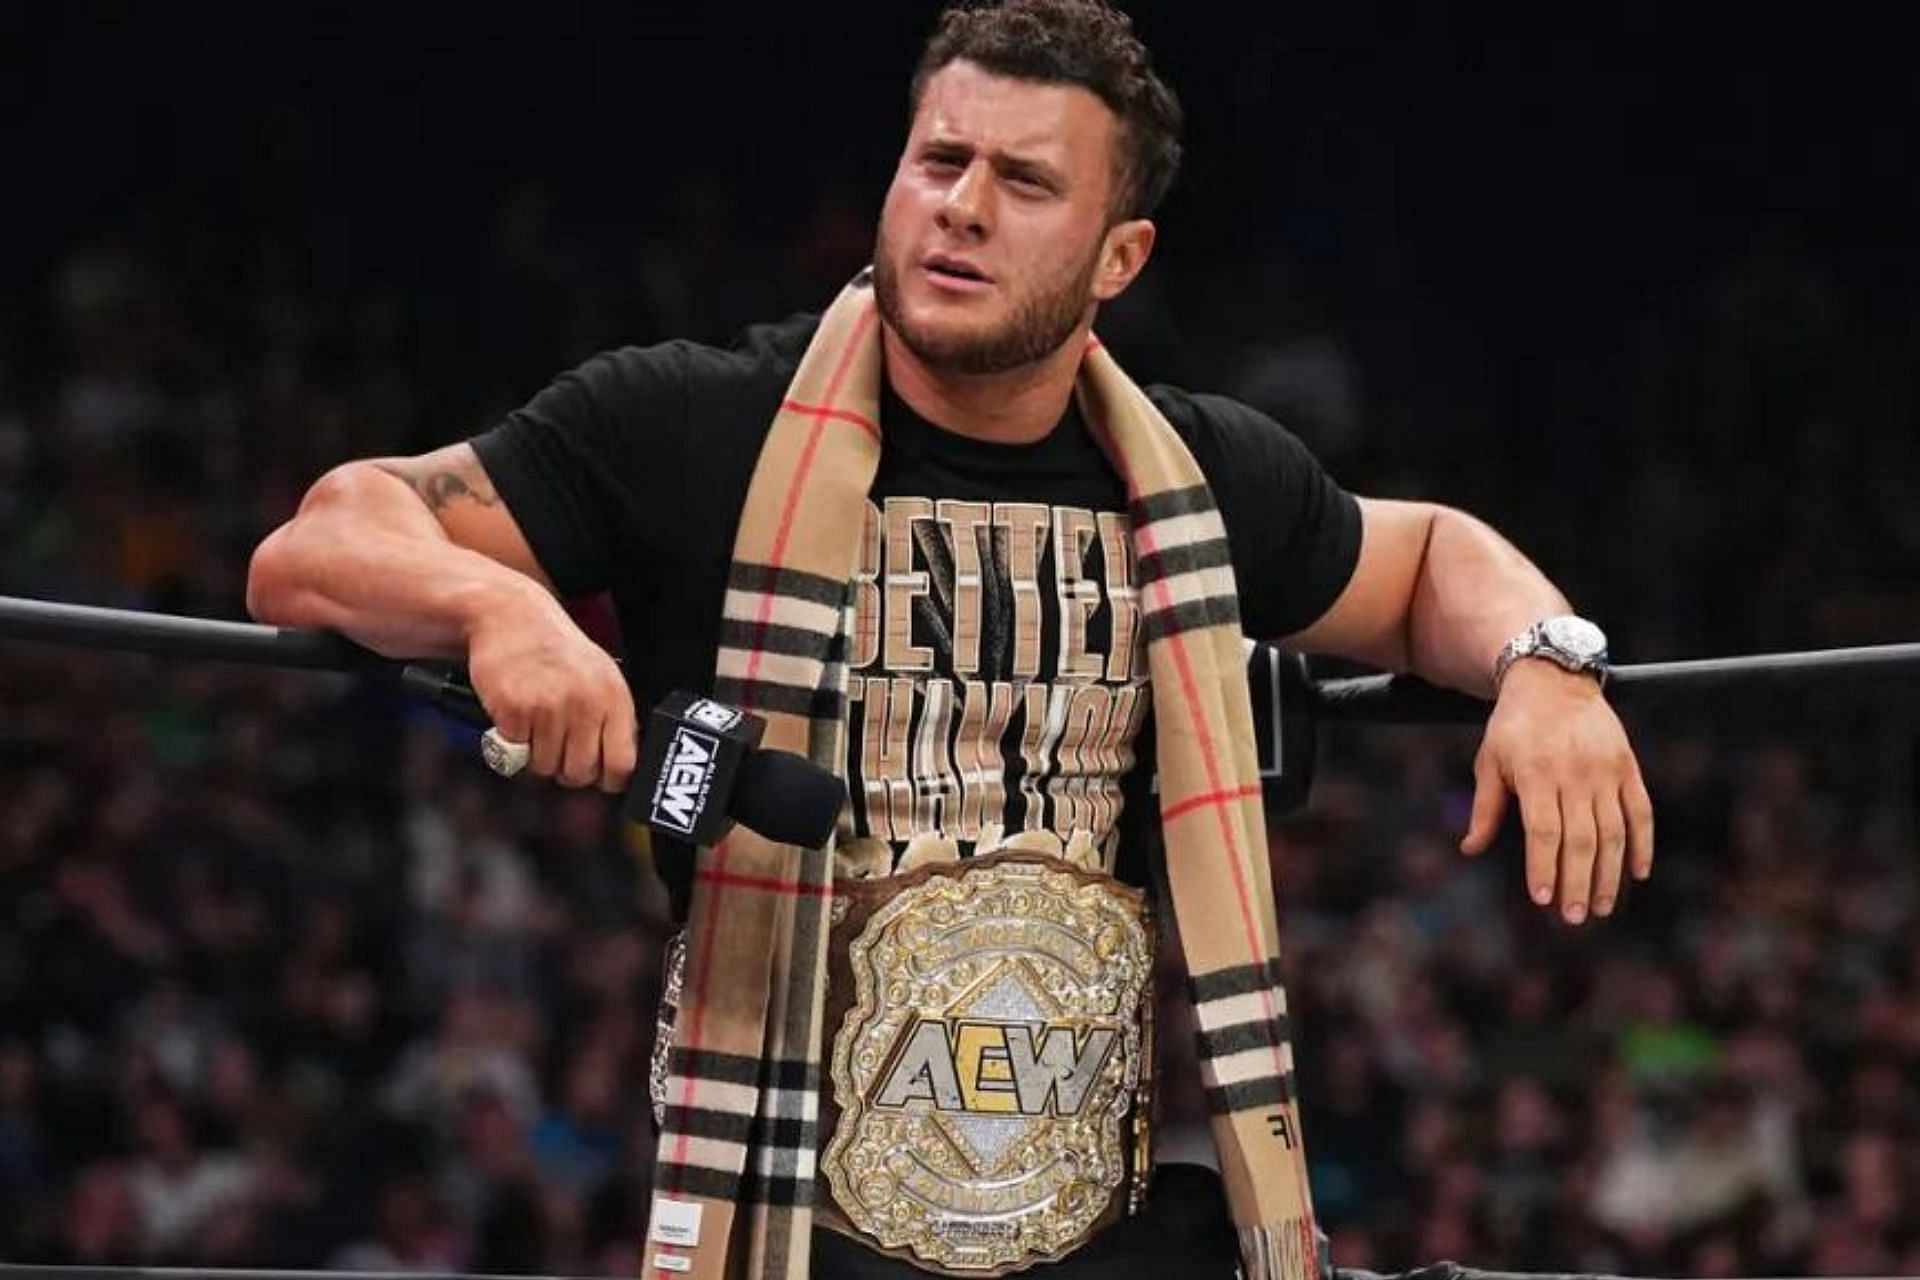 MJF is currently the AEW World Champion